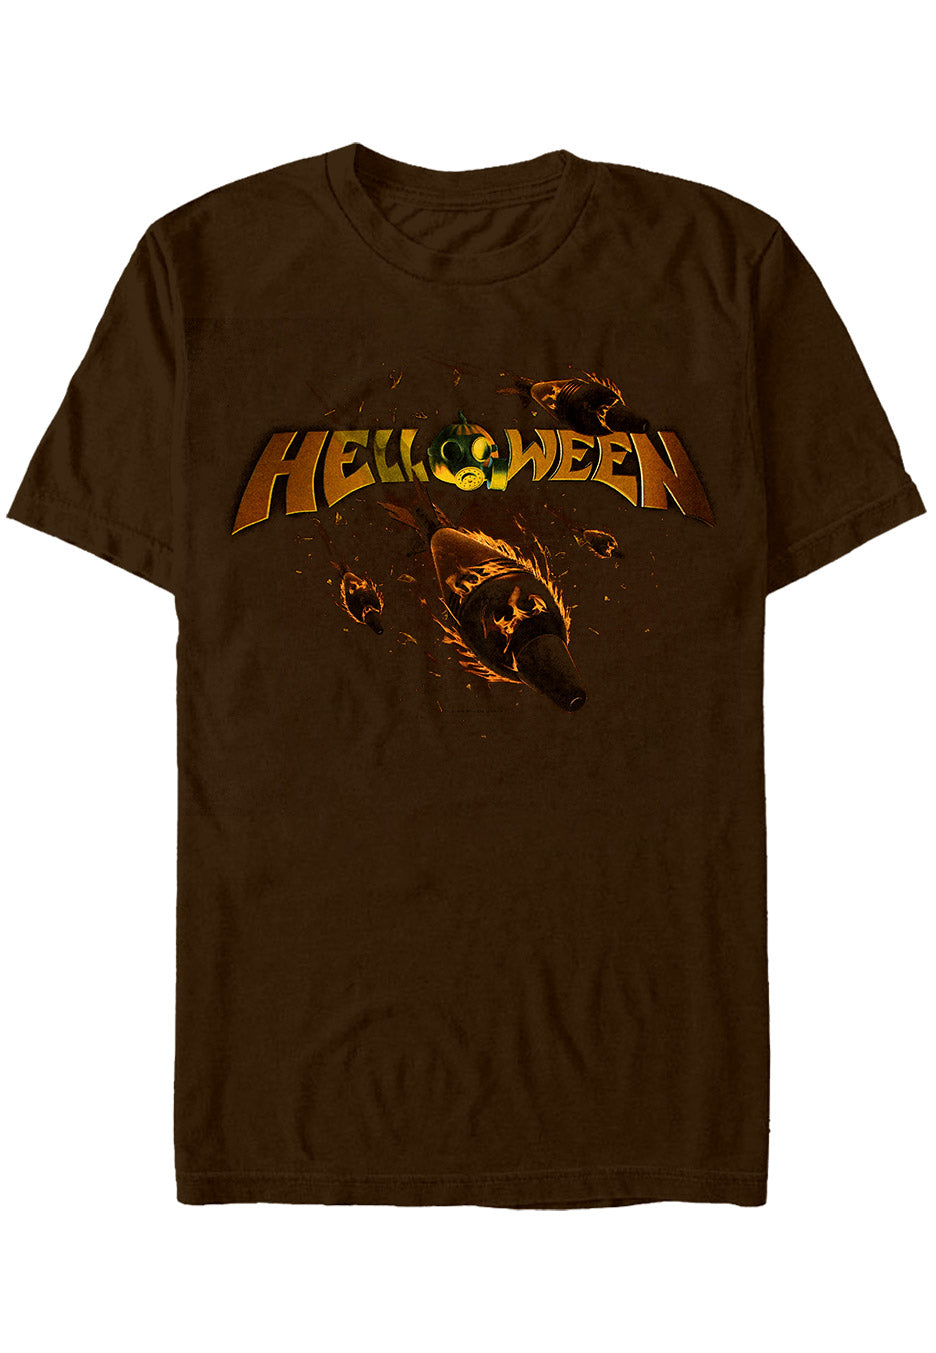 Helloween - Straight Out Of Hell - T-Shirt